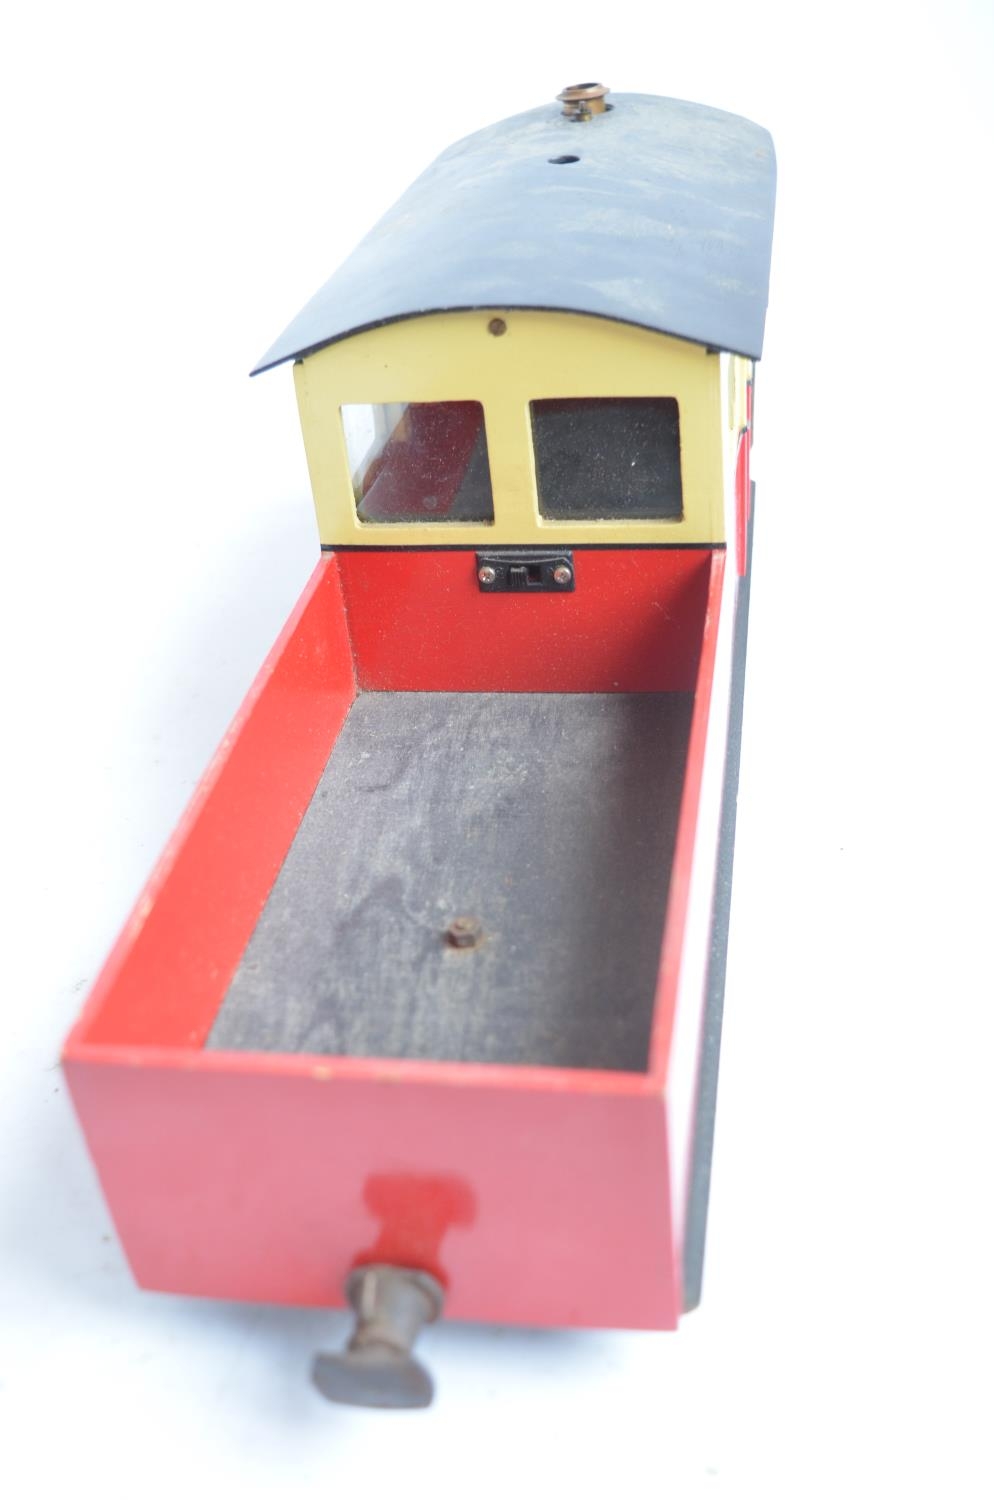 32mm G gauge outdoor metal narrow railcar model steam locomotive with added remote control - Image 8 of 8